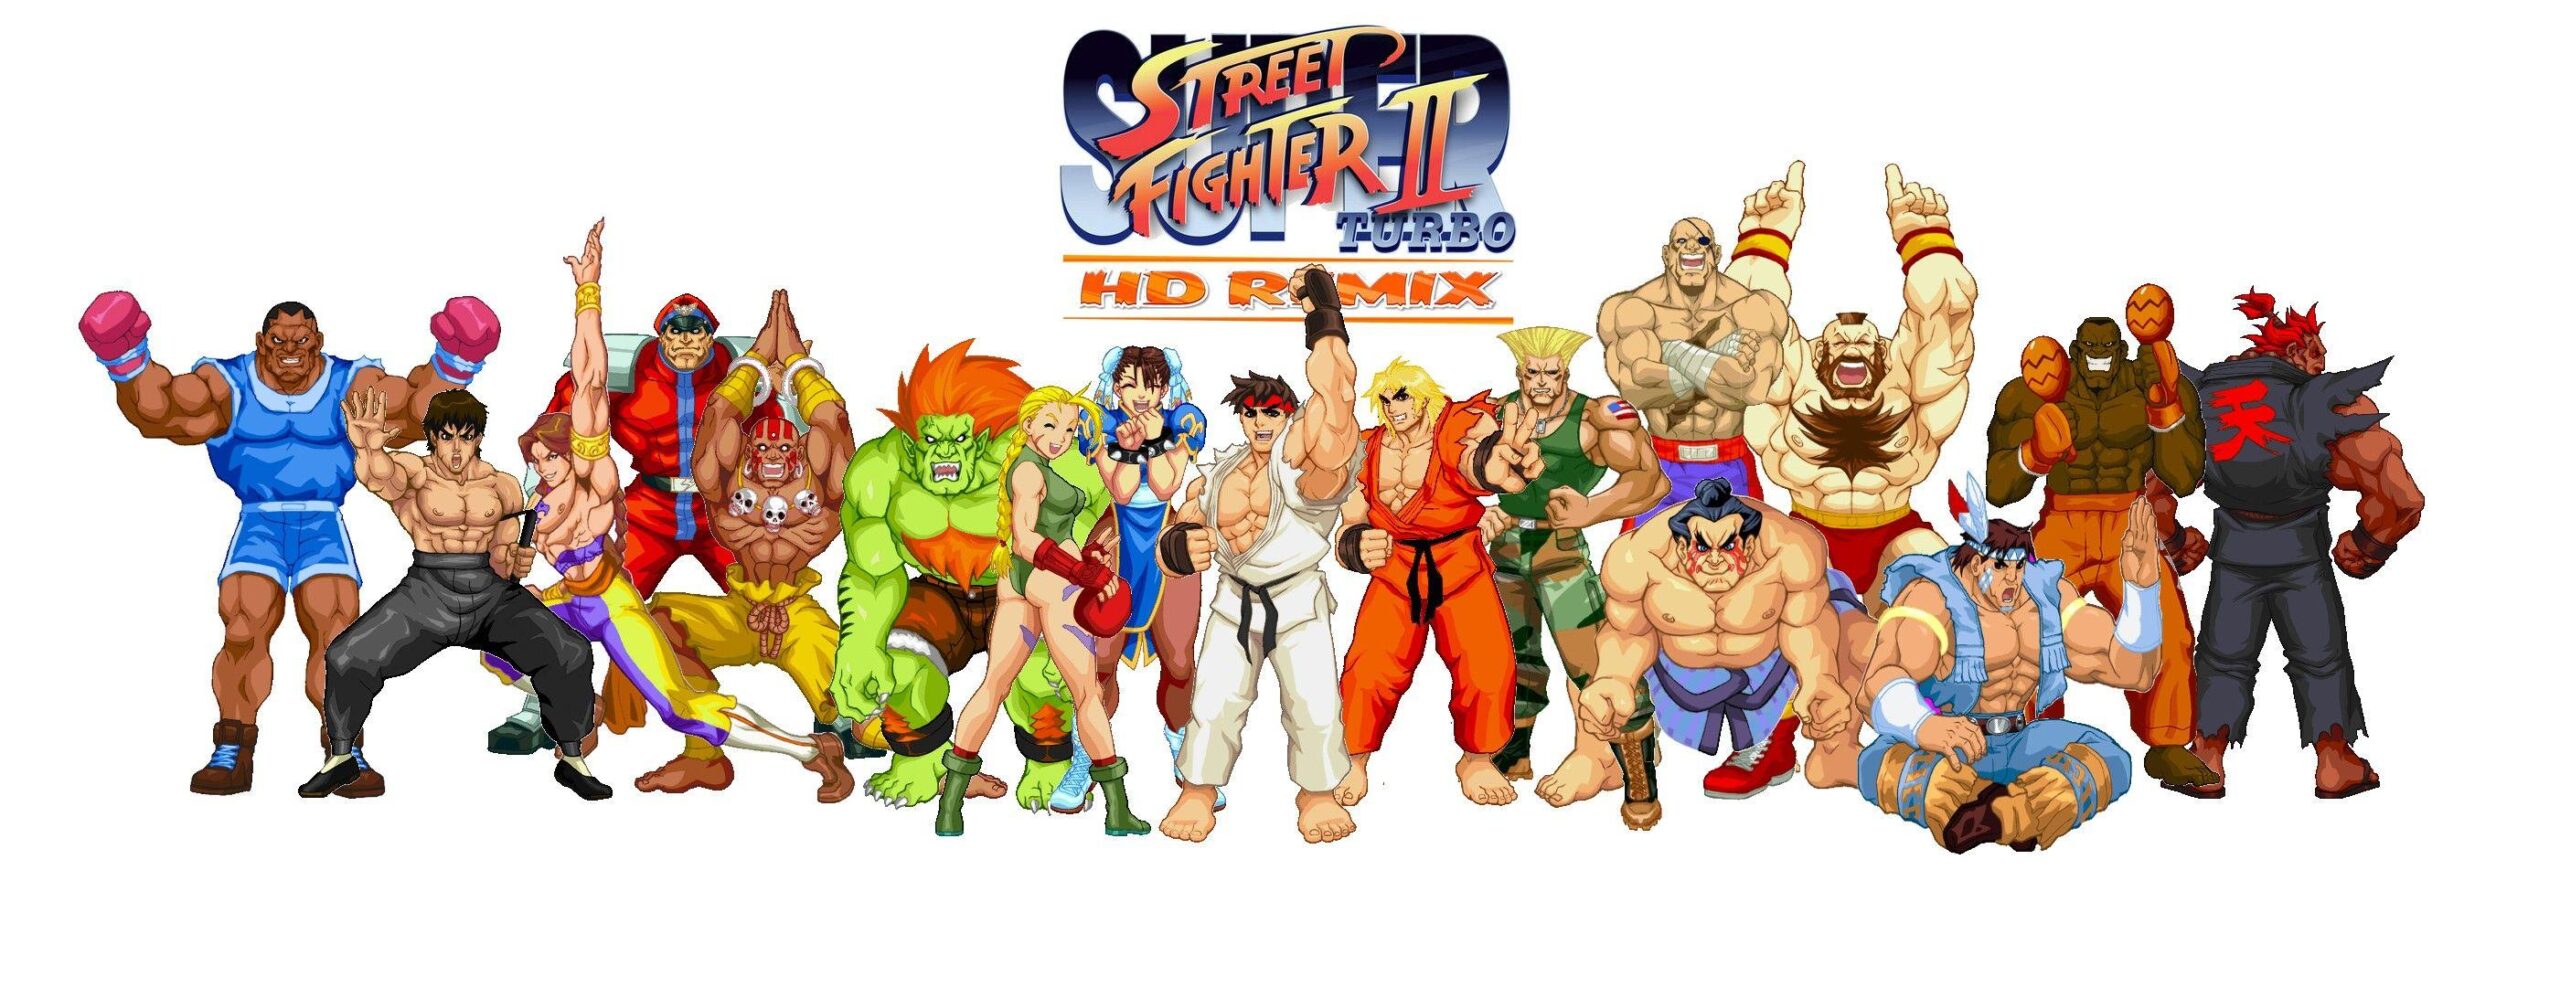 Street Fighter 2 Wallpapers – Scalsys